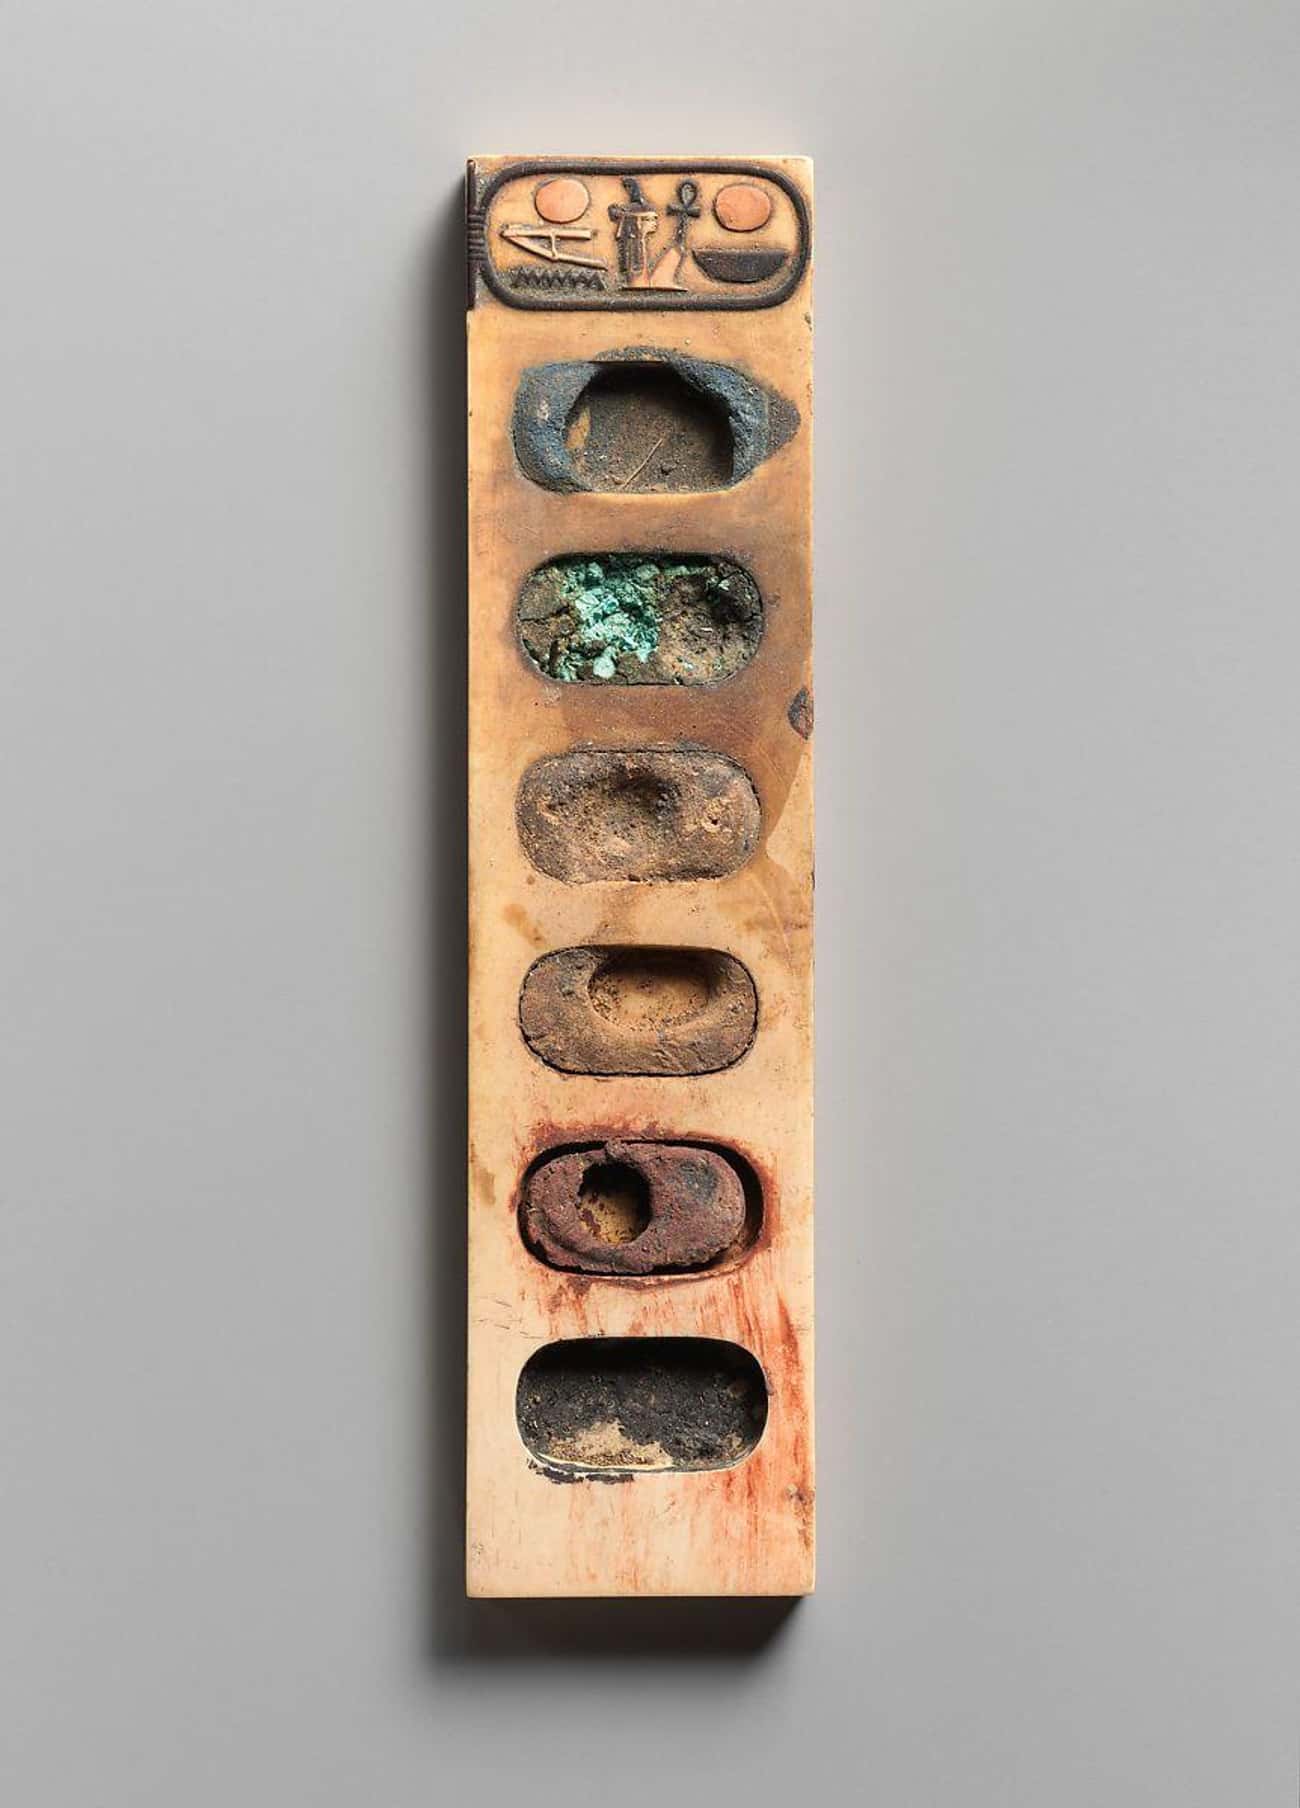 A 3,400-Year-Old Painter's Palette